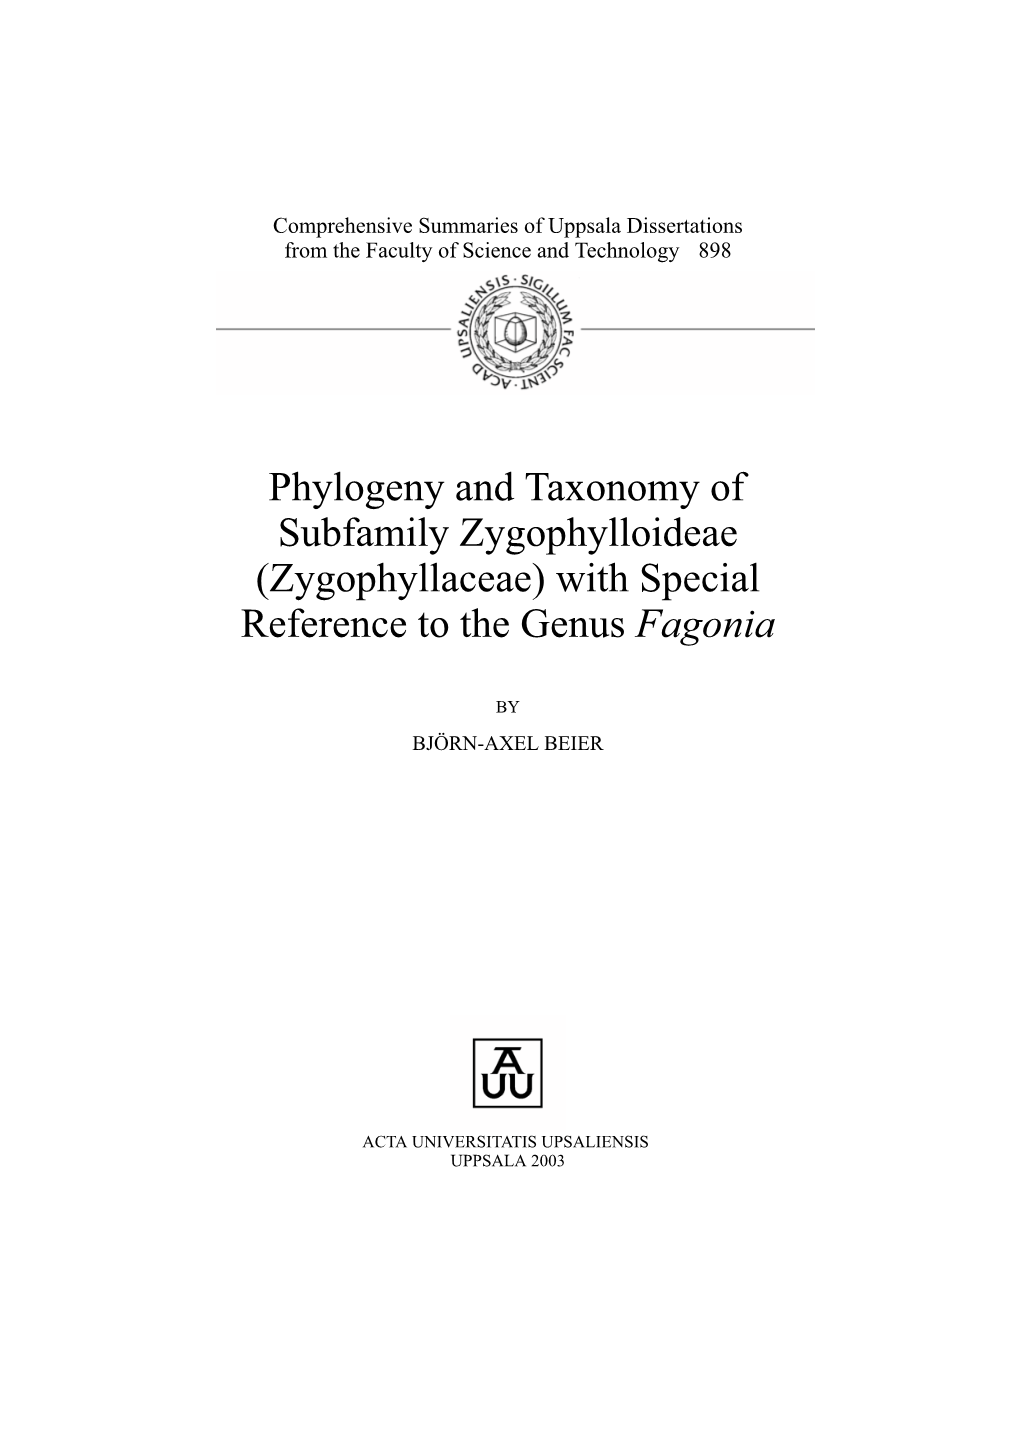 Phylogeny and Taxonomy of Subfamily Zygophylloideae (Zygophyllaceae) with Special Reference to the Genus Fagonia